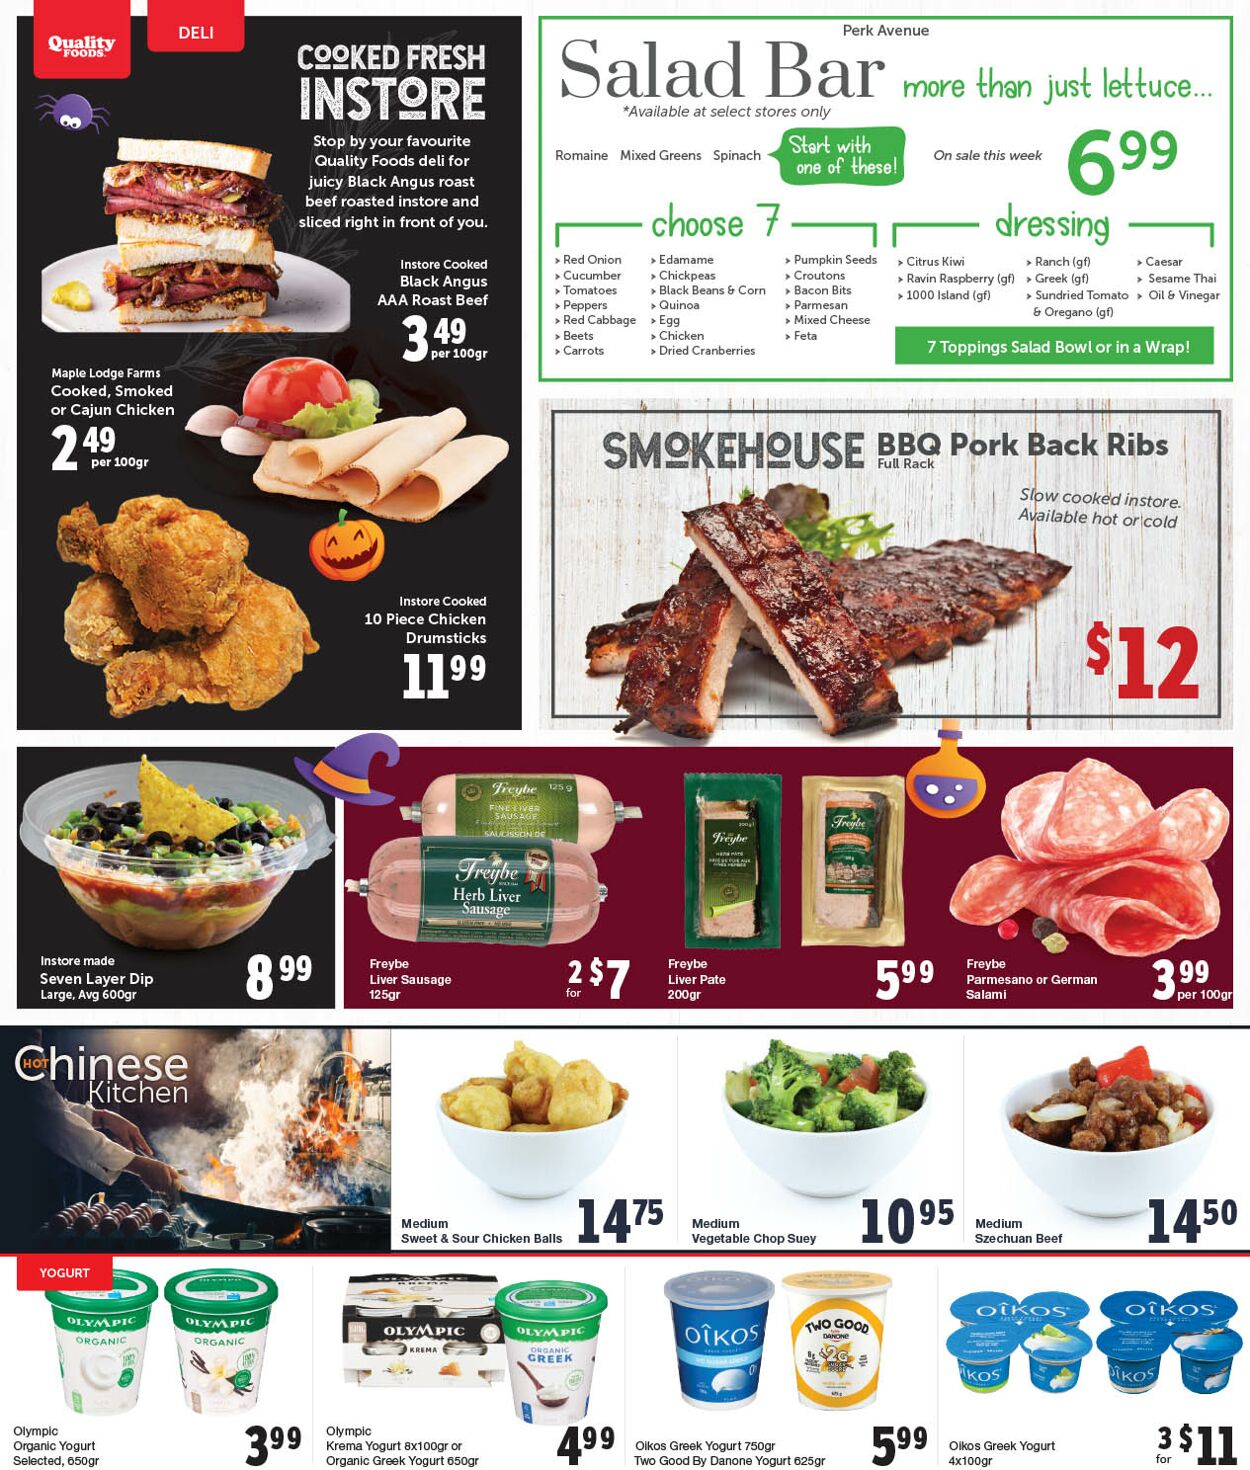 Quality Foods Flyer from 10/23/2023